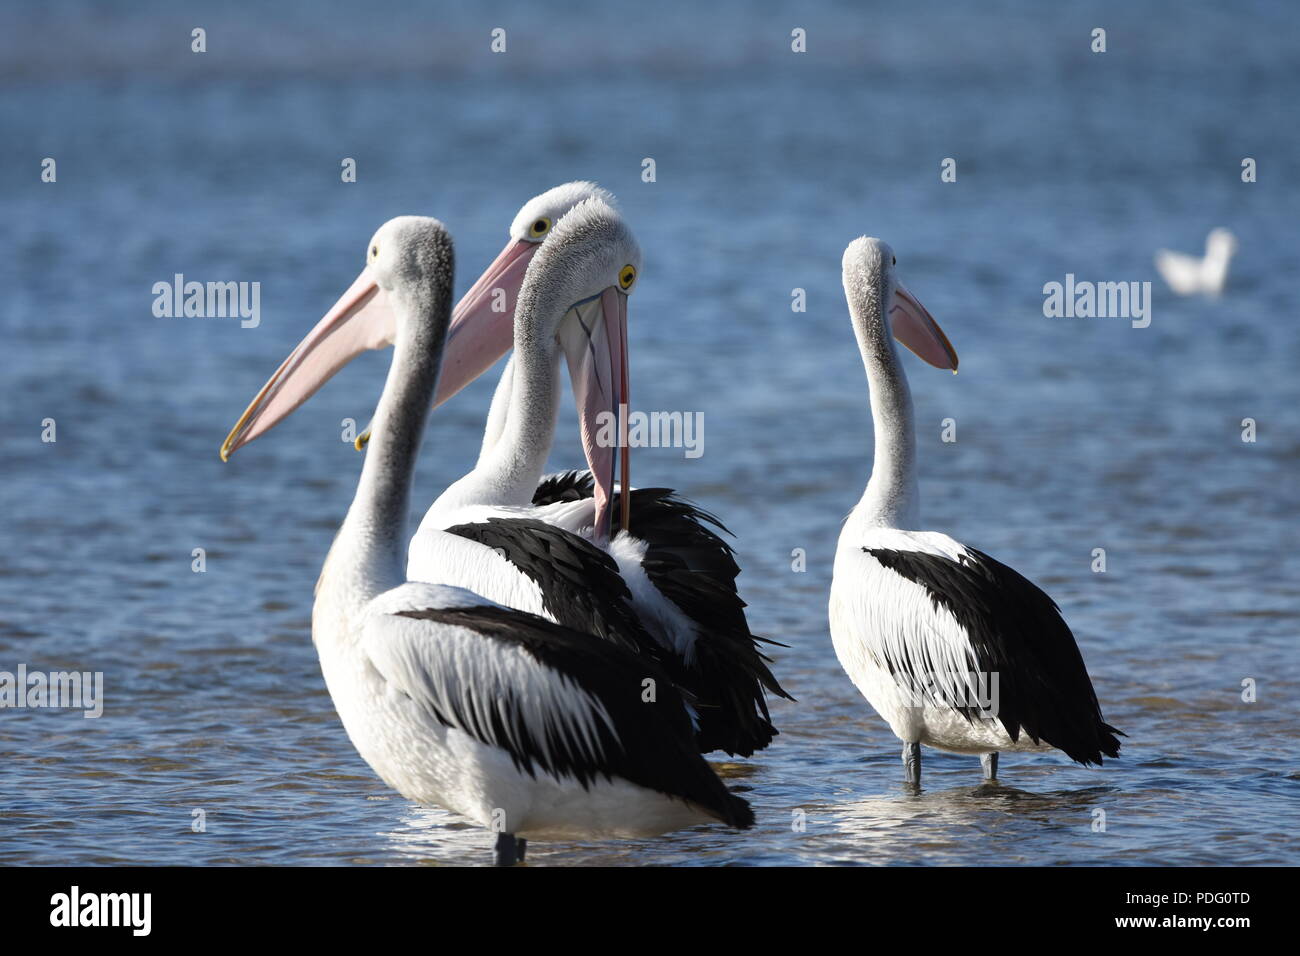 Pelicans,Pelicans are a genus of large water birds that make up the family Pelecanidae. Stock Photo